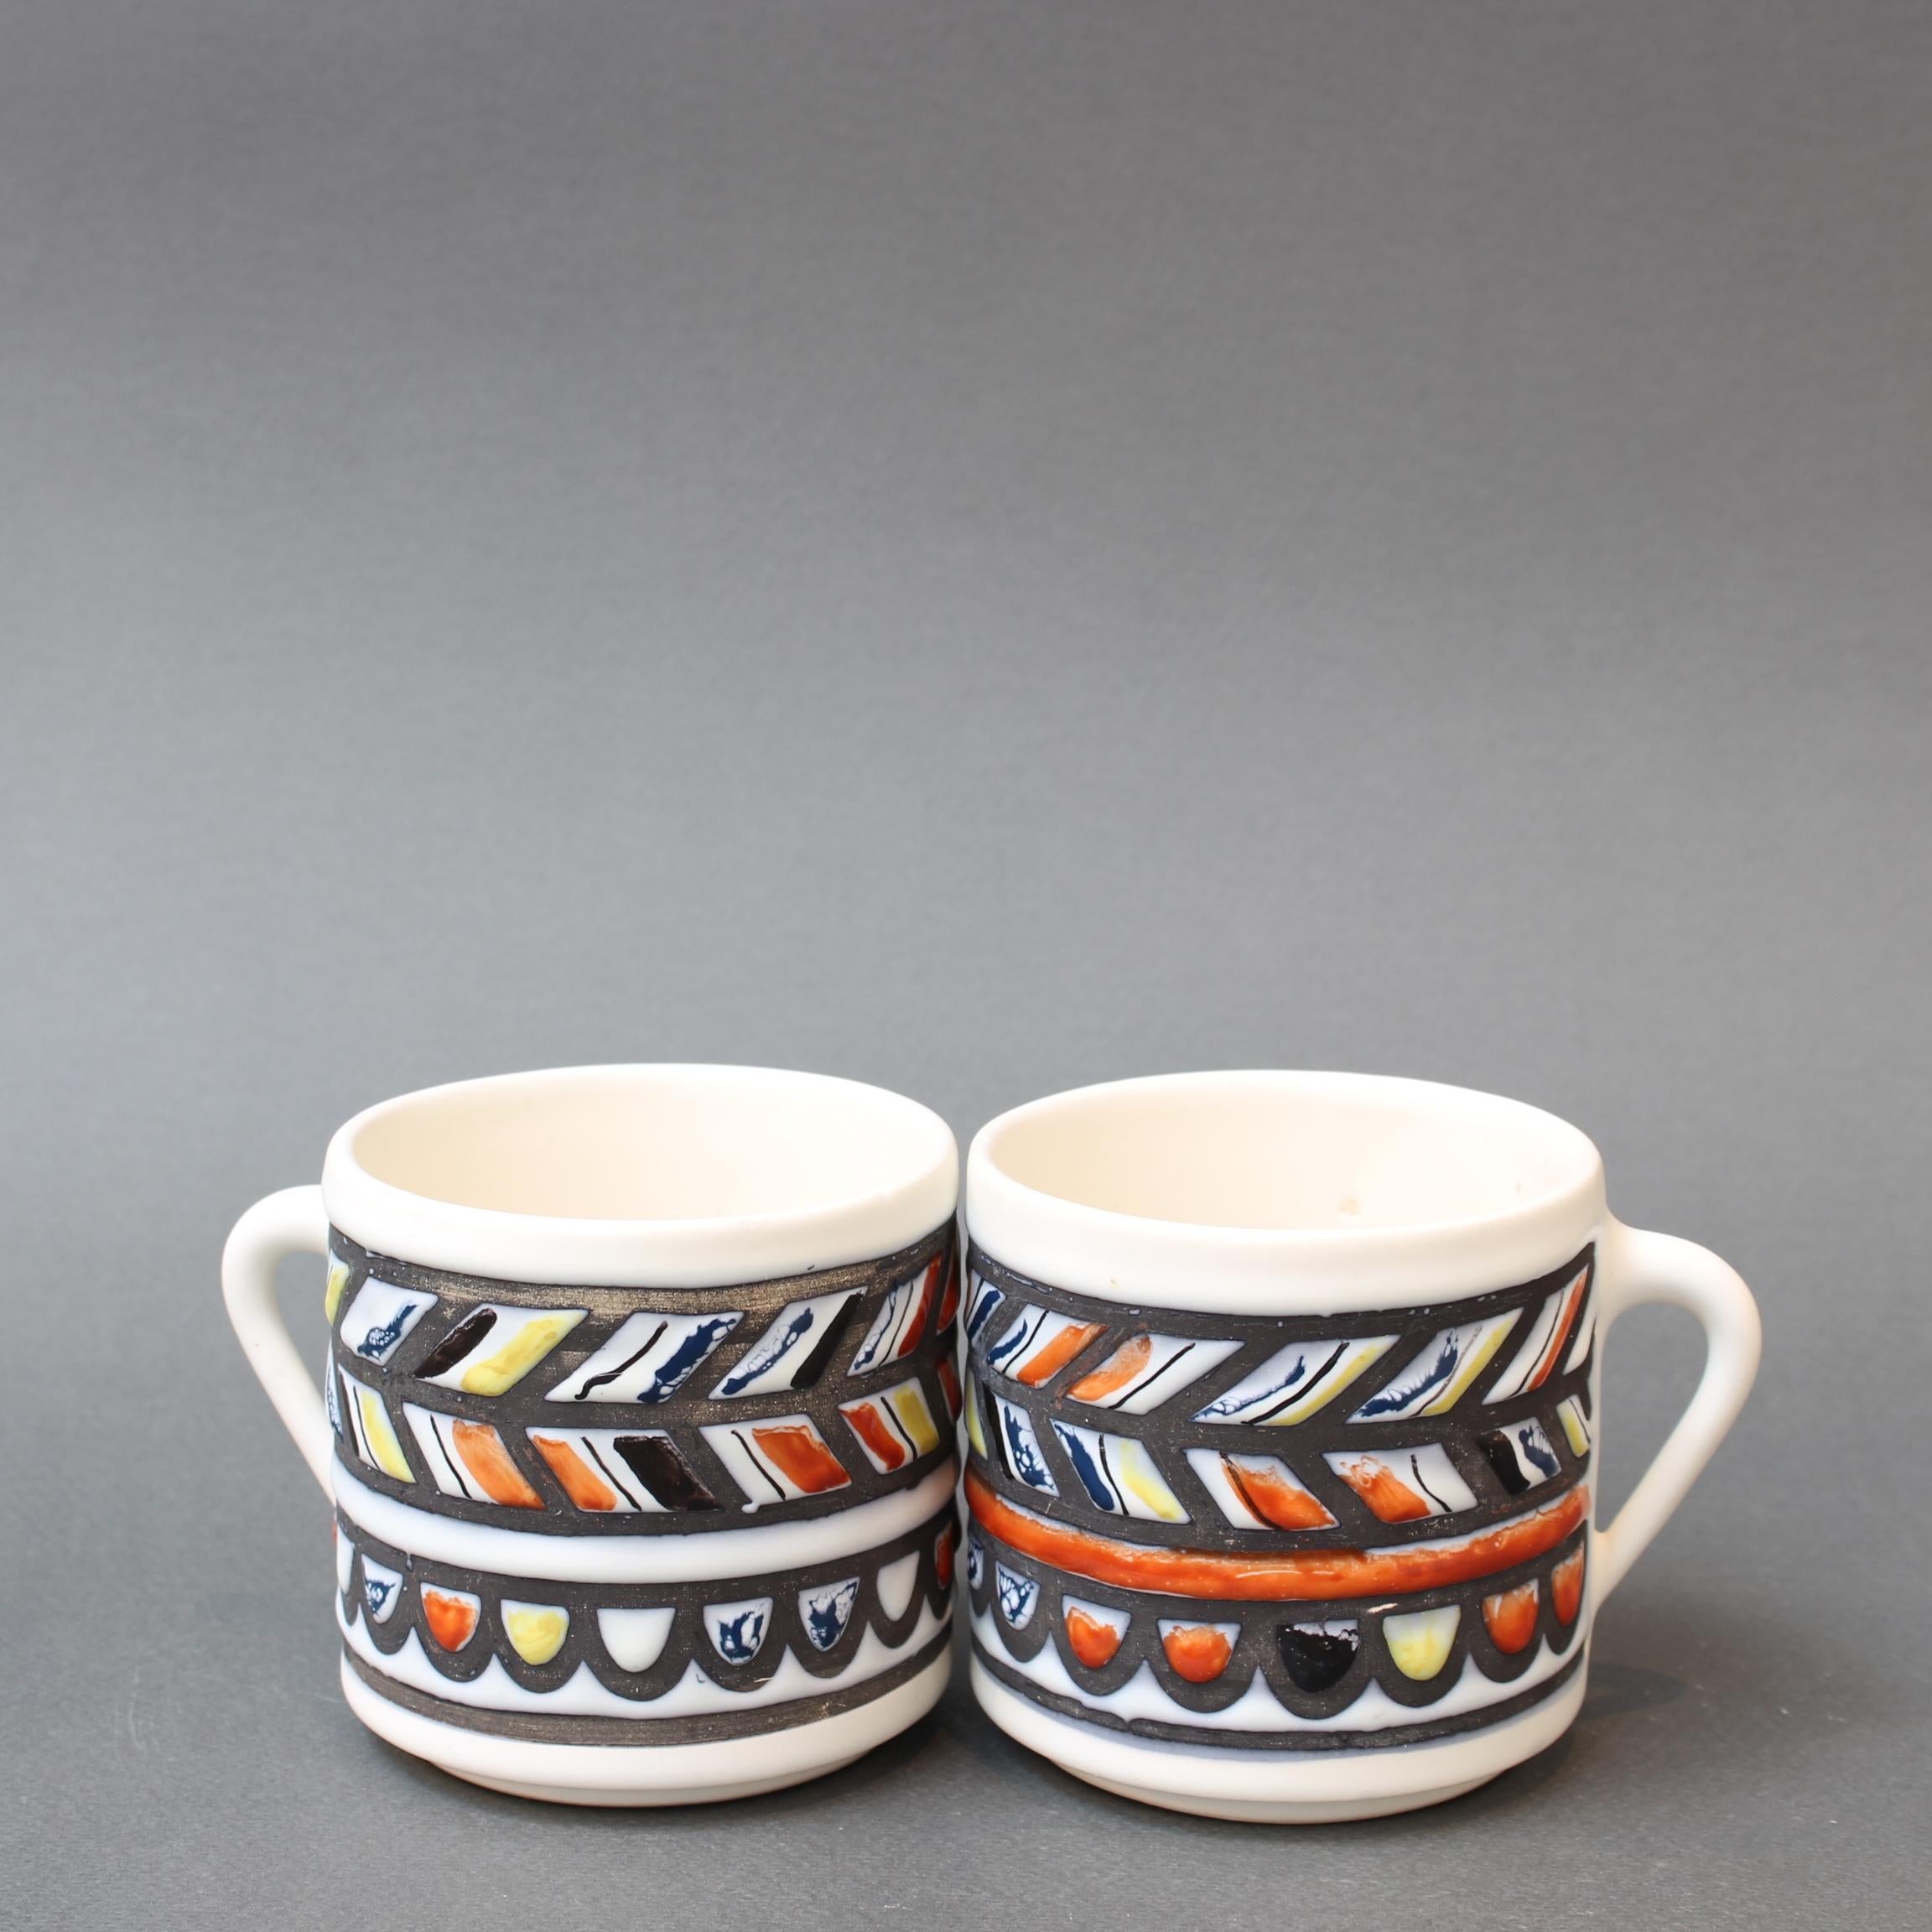 Vintage French Ceramic Set of Vessels by Roger Capron (circa 1960s) For Sale 1